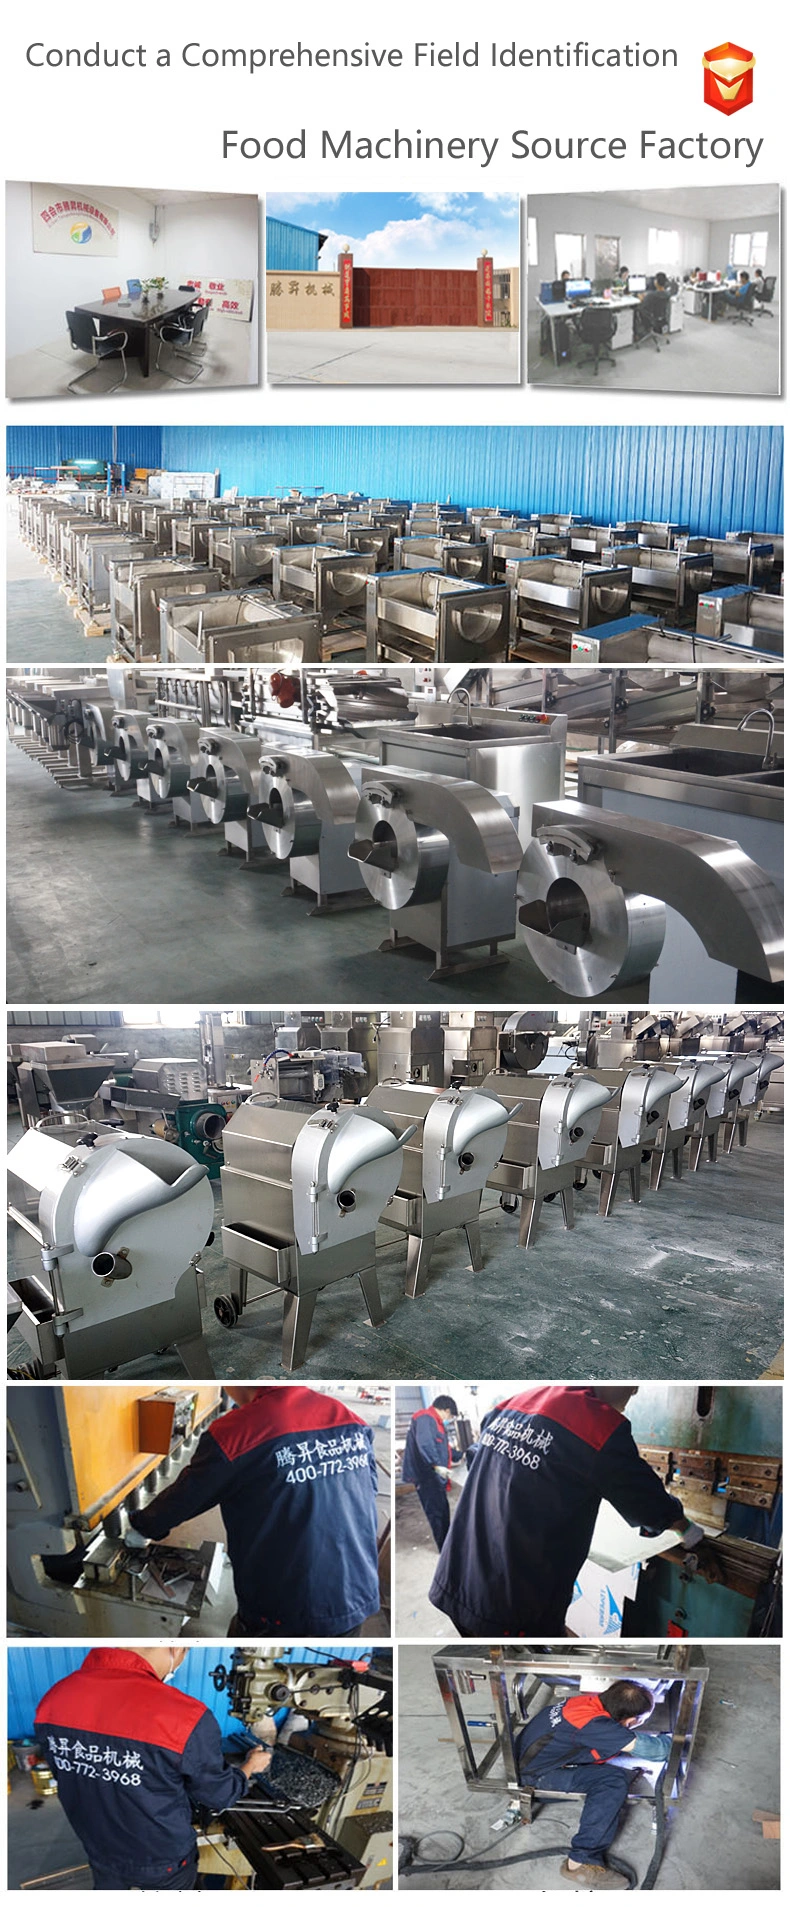 Vegetable Cutter Food Processor Kitchen Tool Equipment Appliance Ware Cutting Processing Machinery (TS-Q118A)